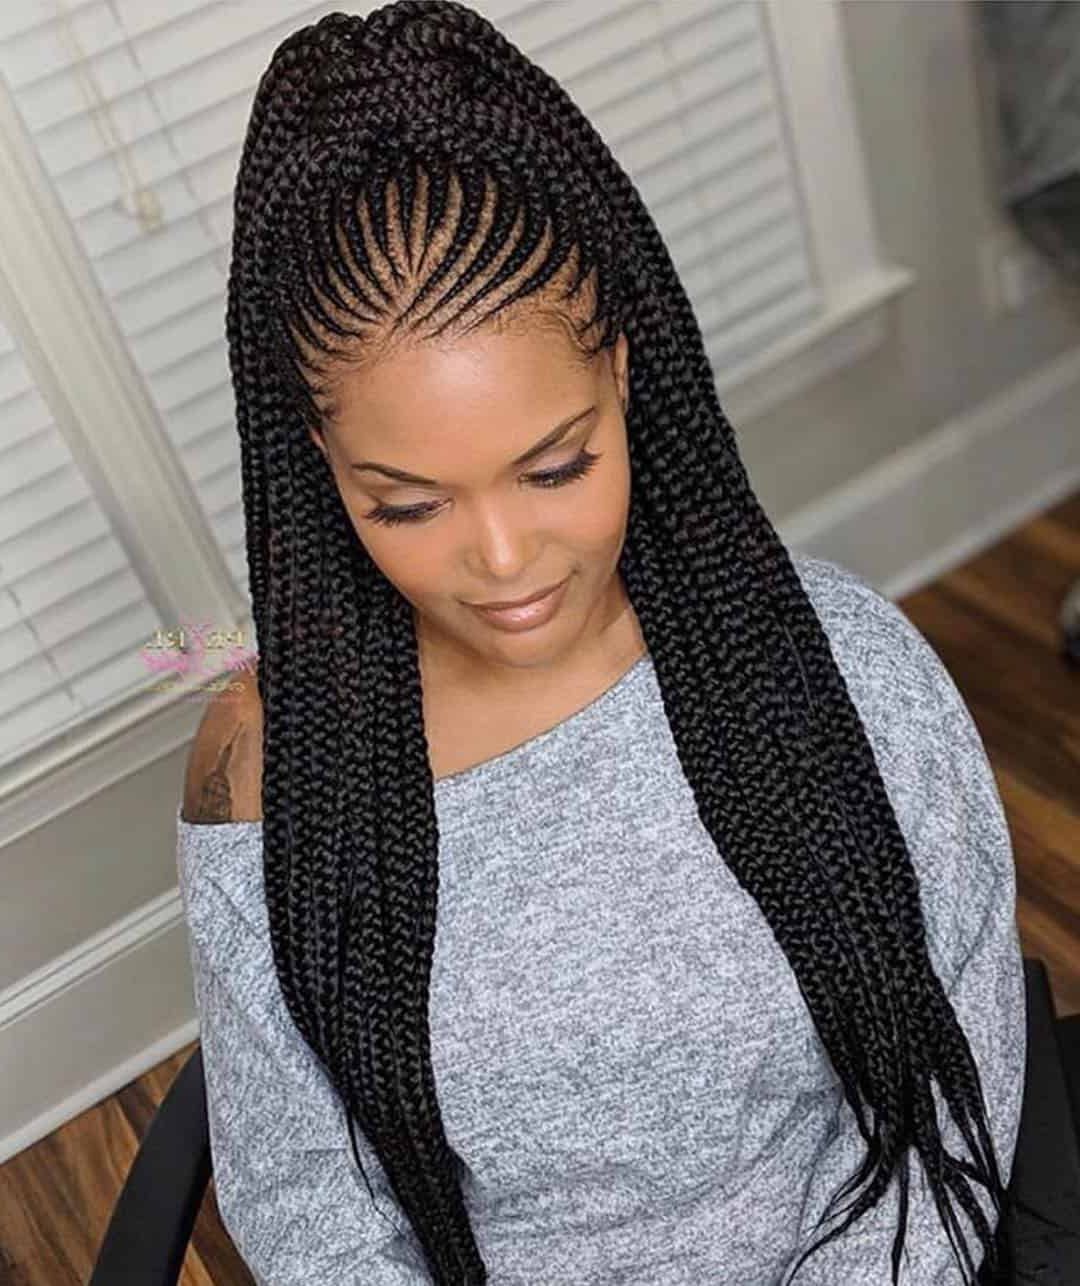 27 Lovely Lemonade Braids To Refresh Your Look – Wild About Inside 2019 Golden Swirl Lemonade Braided Hairstyles (View 12 of 20)